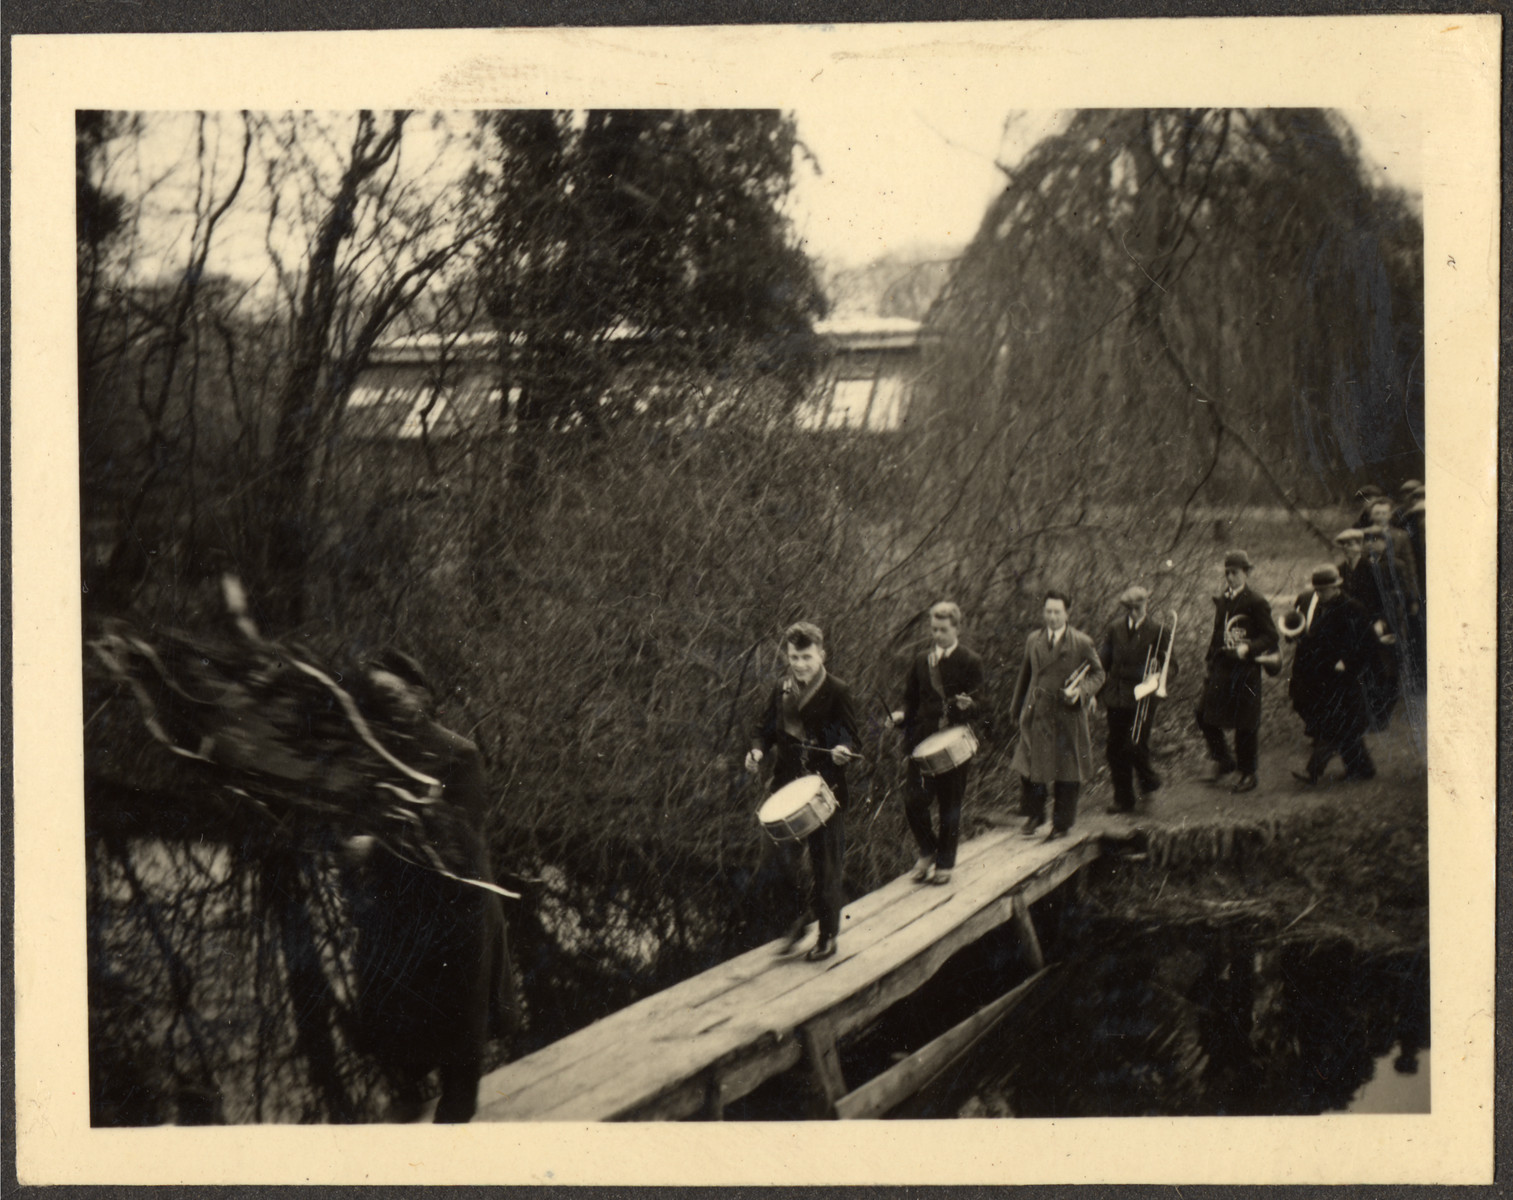 Students many of them German Jewish refugees, march with muscial instruments across a pedestrian bridge at a Quaker boarding school in Eerde.